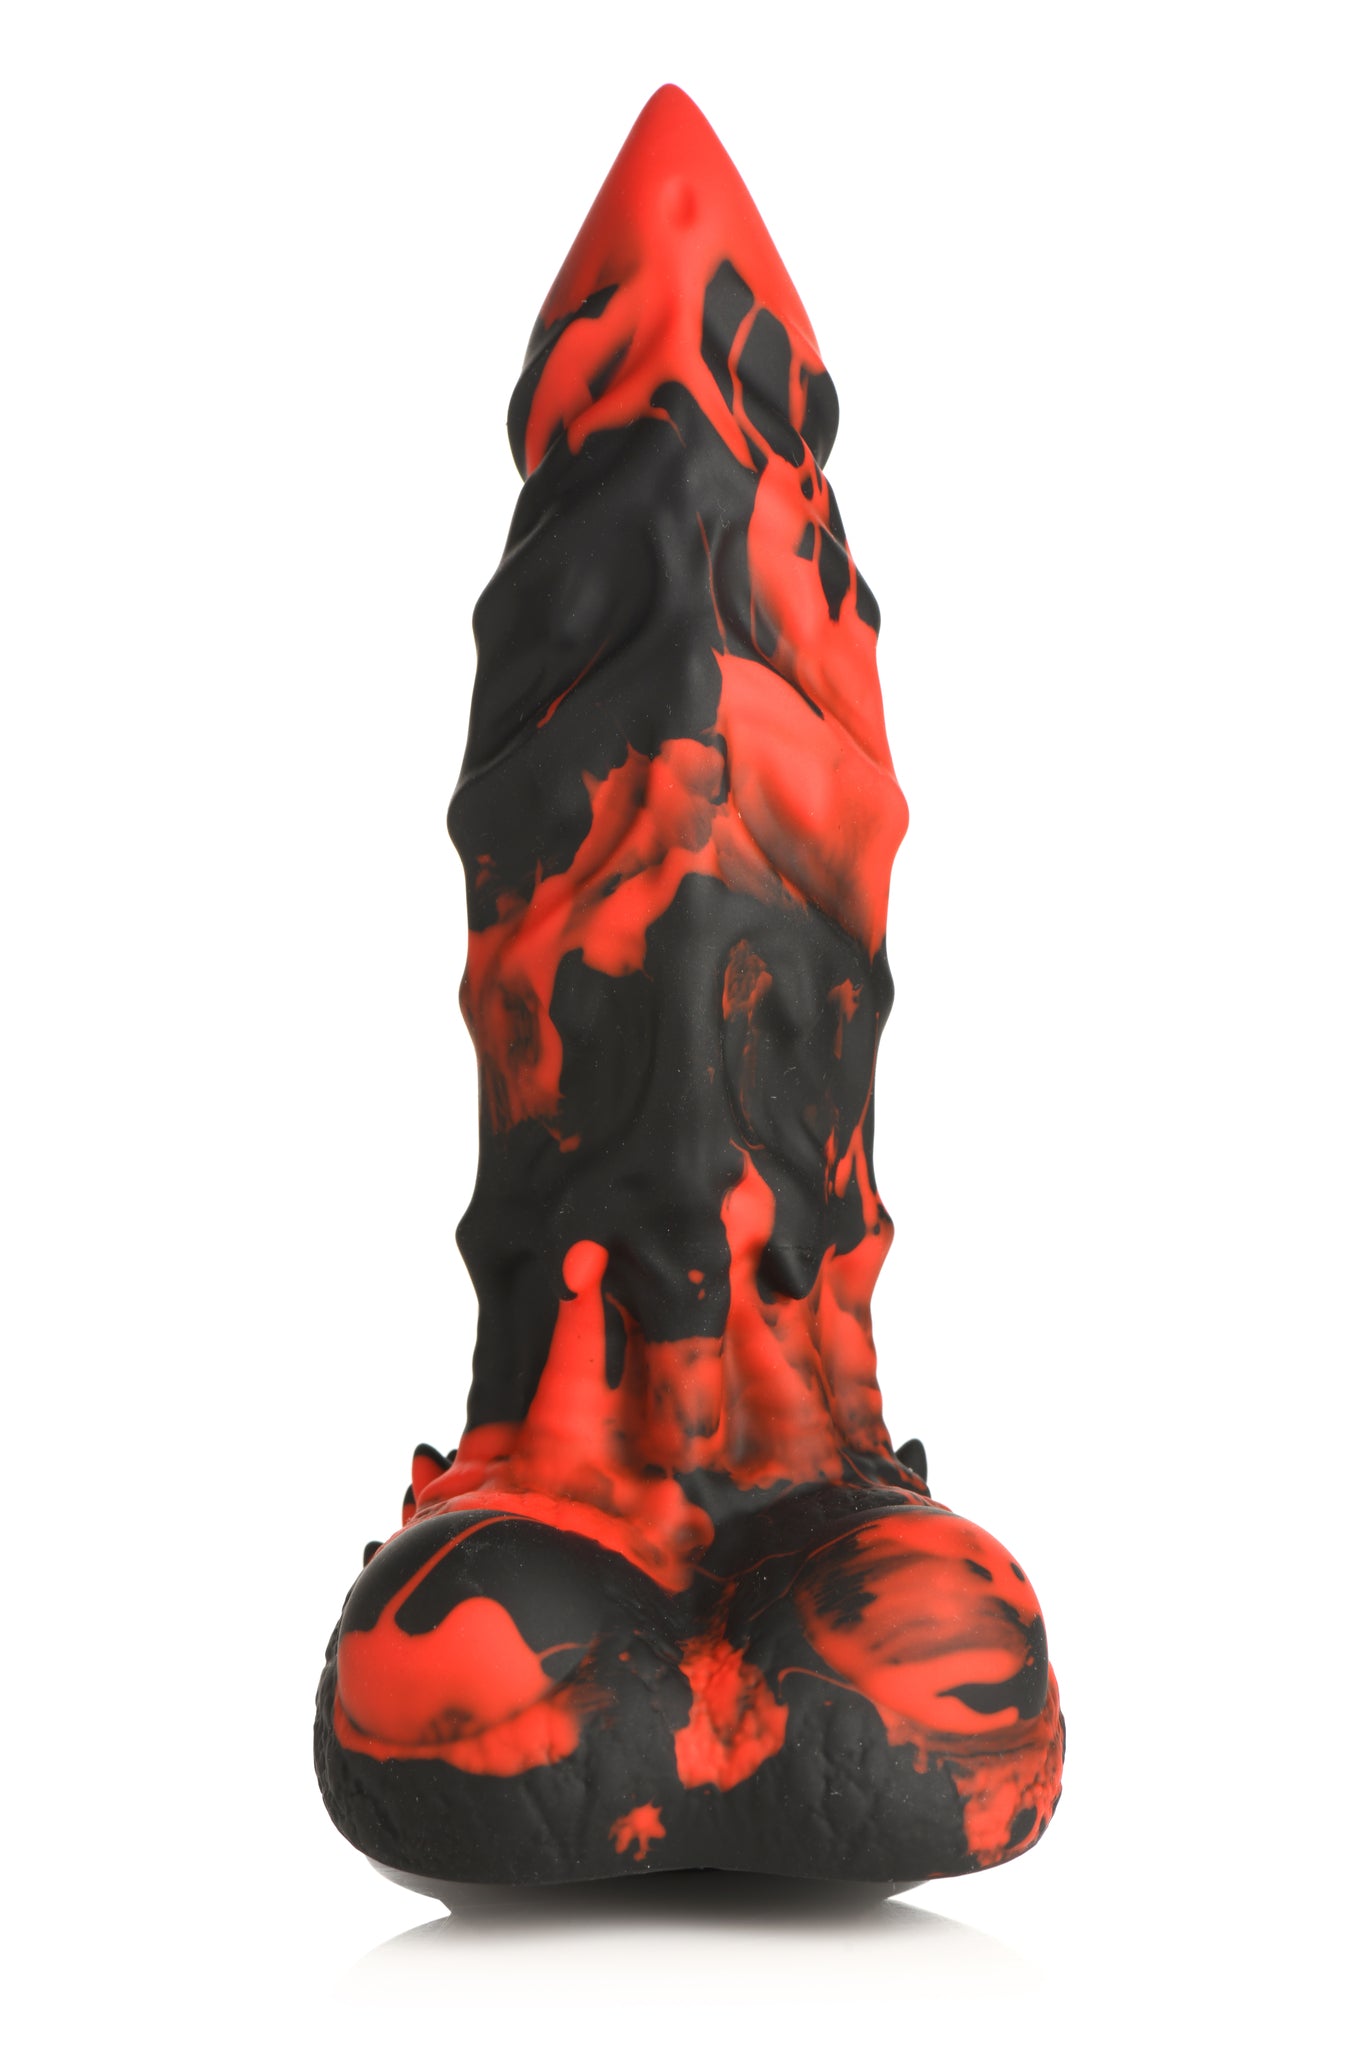 Fire Demon Monster Fantasy Dildo made of Silicone by Creature Cocks